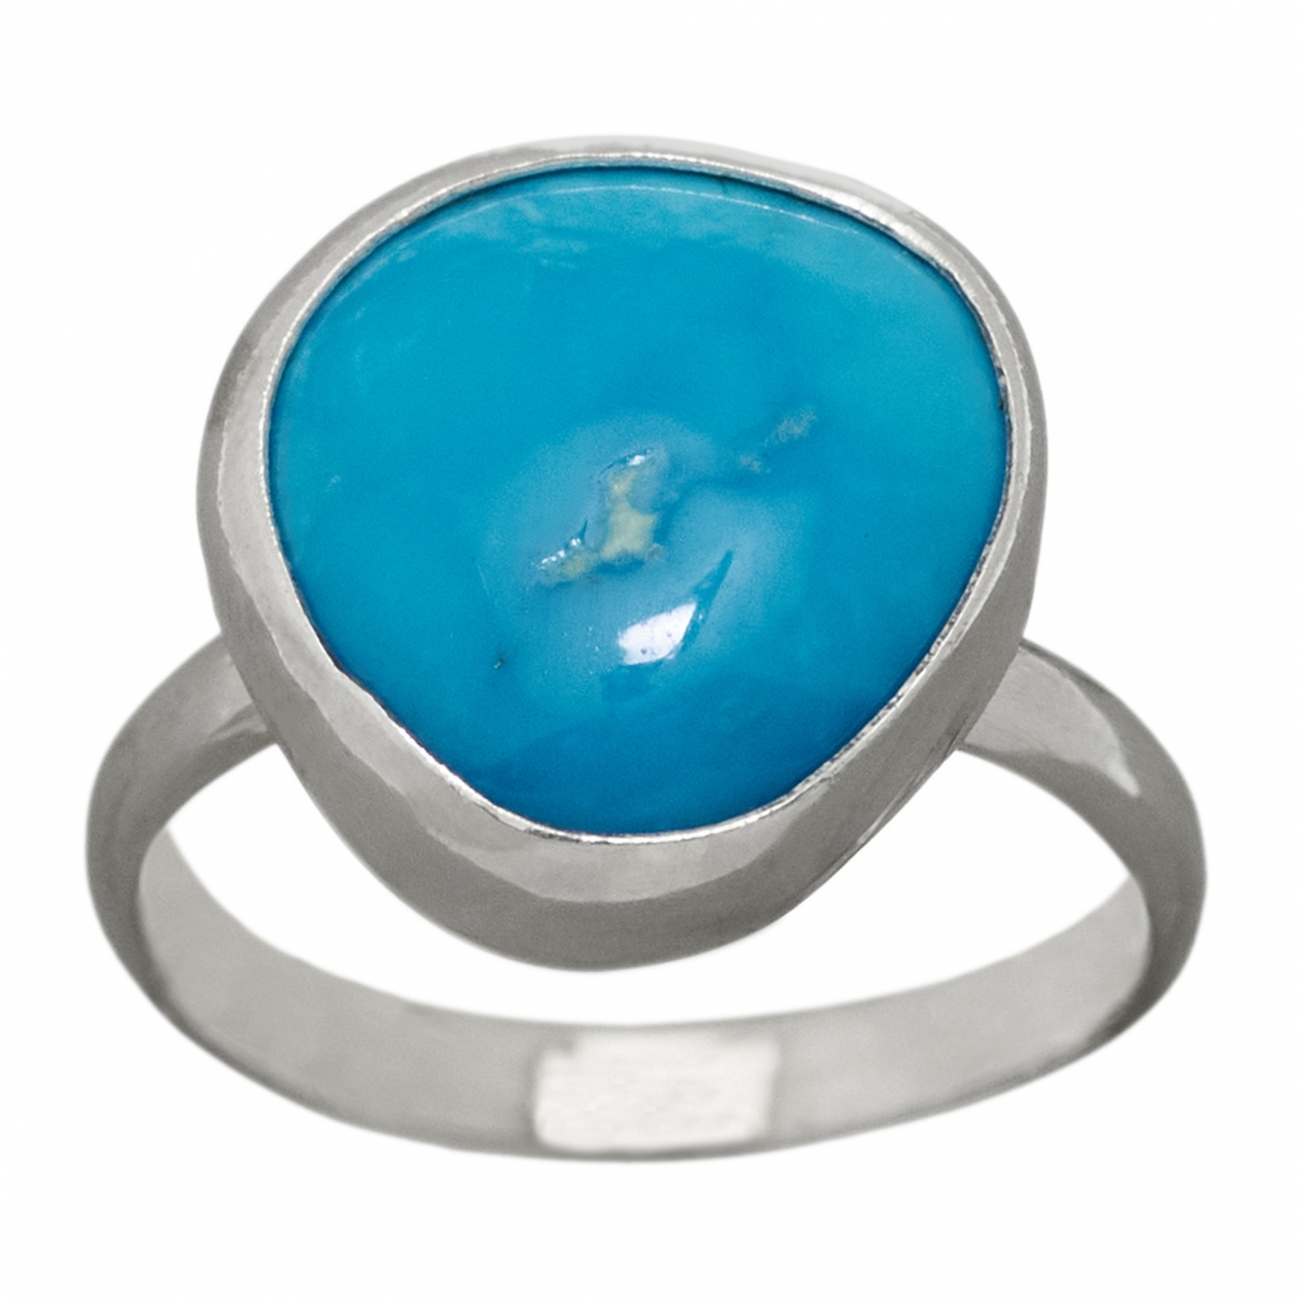 Navajo ring for women BA1036 in turquoise and silver - Harpo Paris